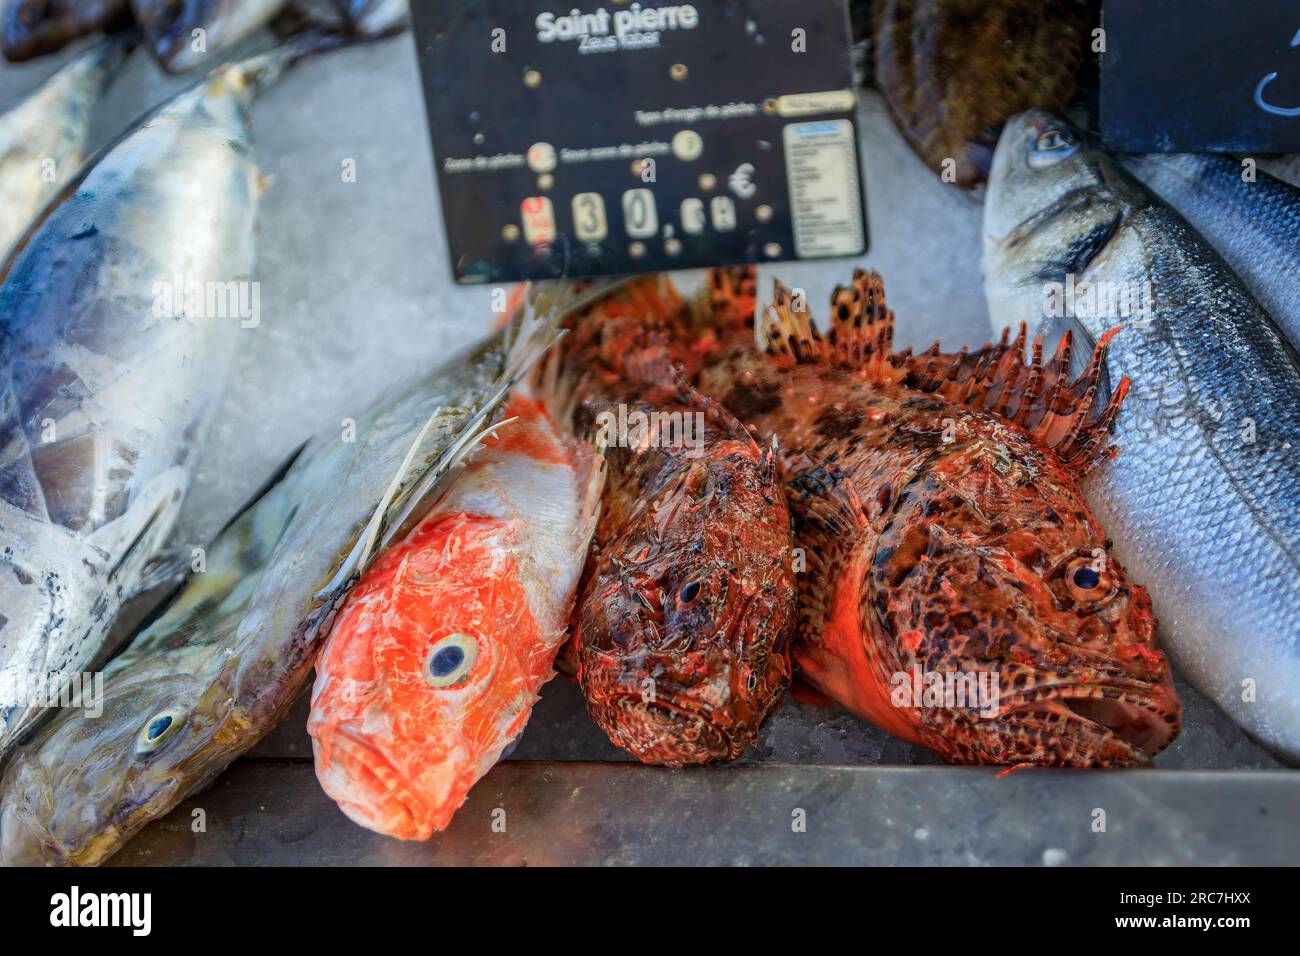 Freshly caught John Dory or Saint Pierre fish on display at the fish market in the old town or Vieil Antibes, South of France Stock Photo